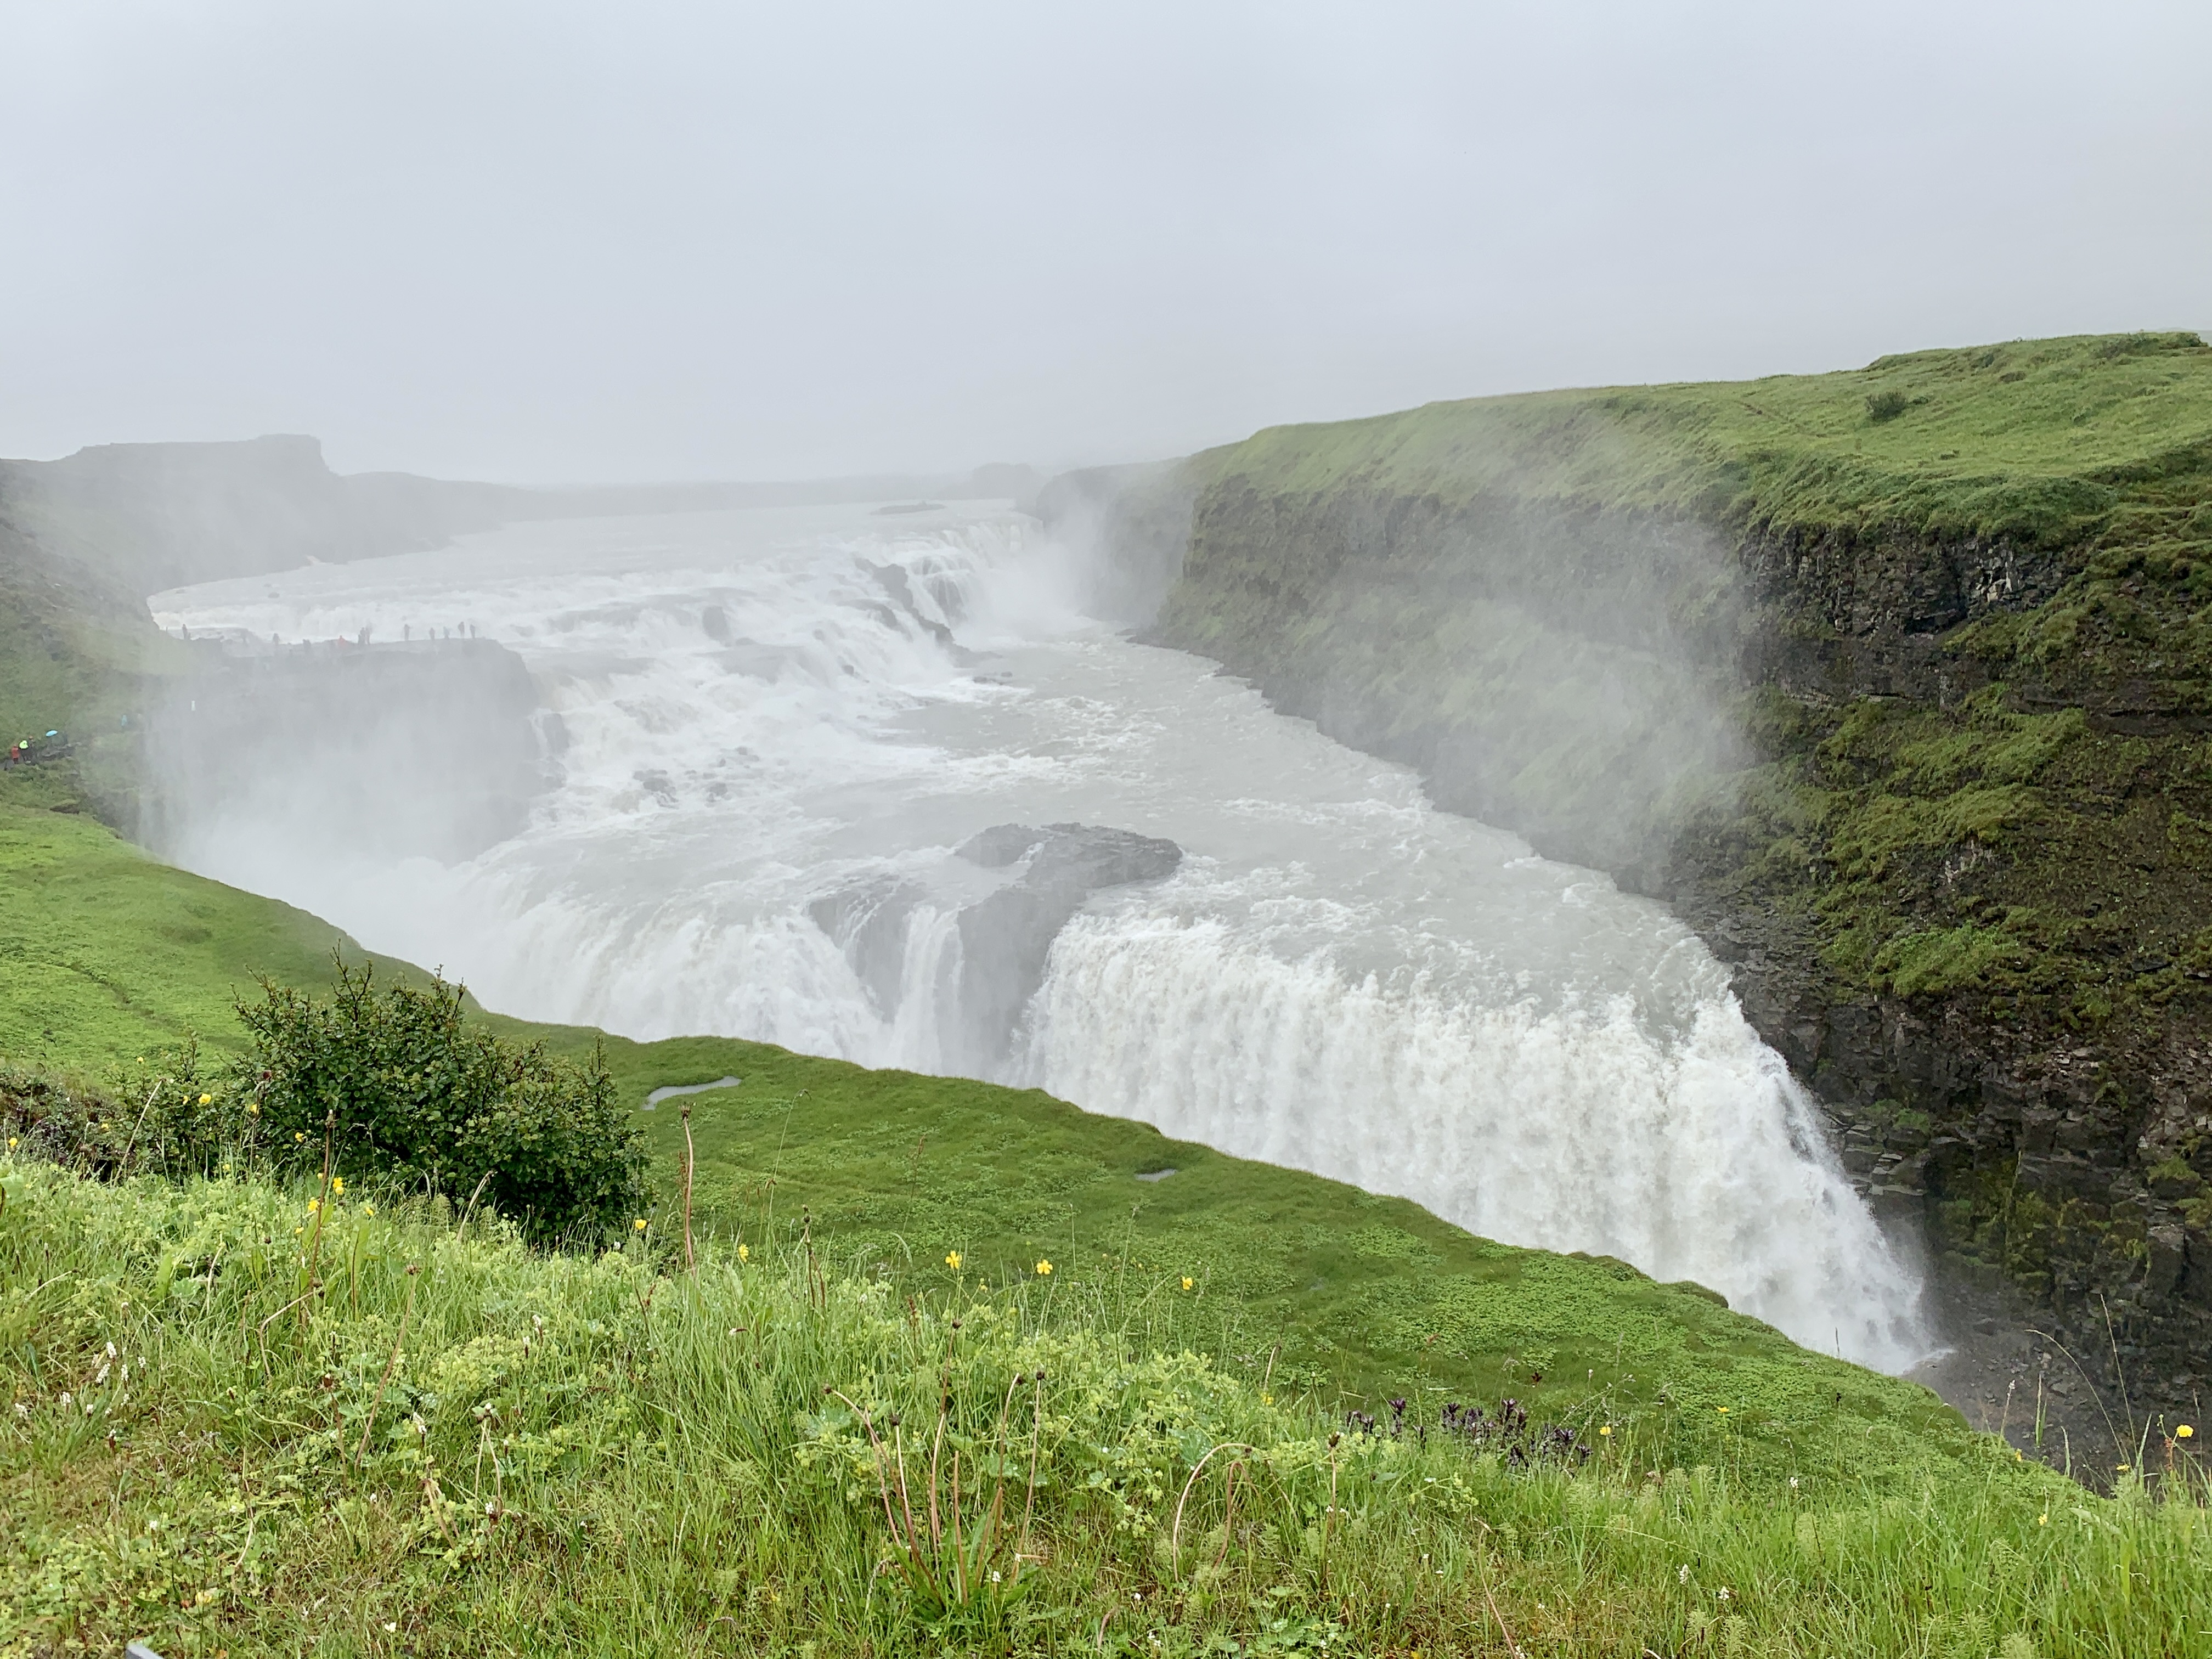 Glimpse of two levels of the Gullfoss Waterfall, surrounded by green cliffs